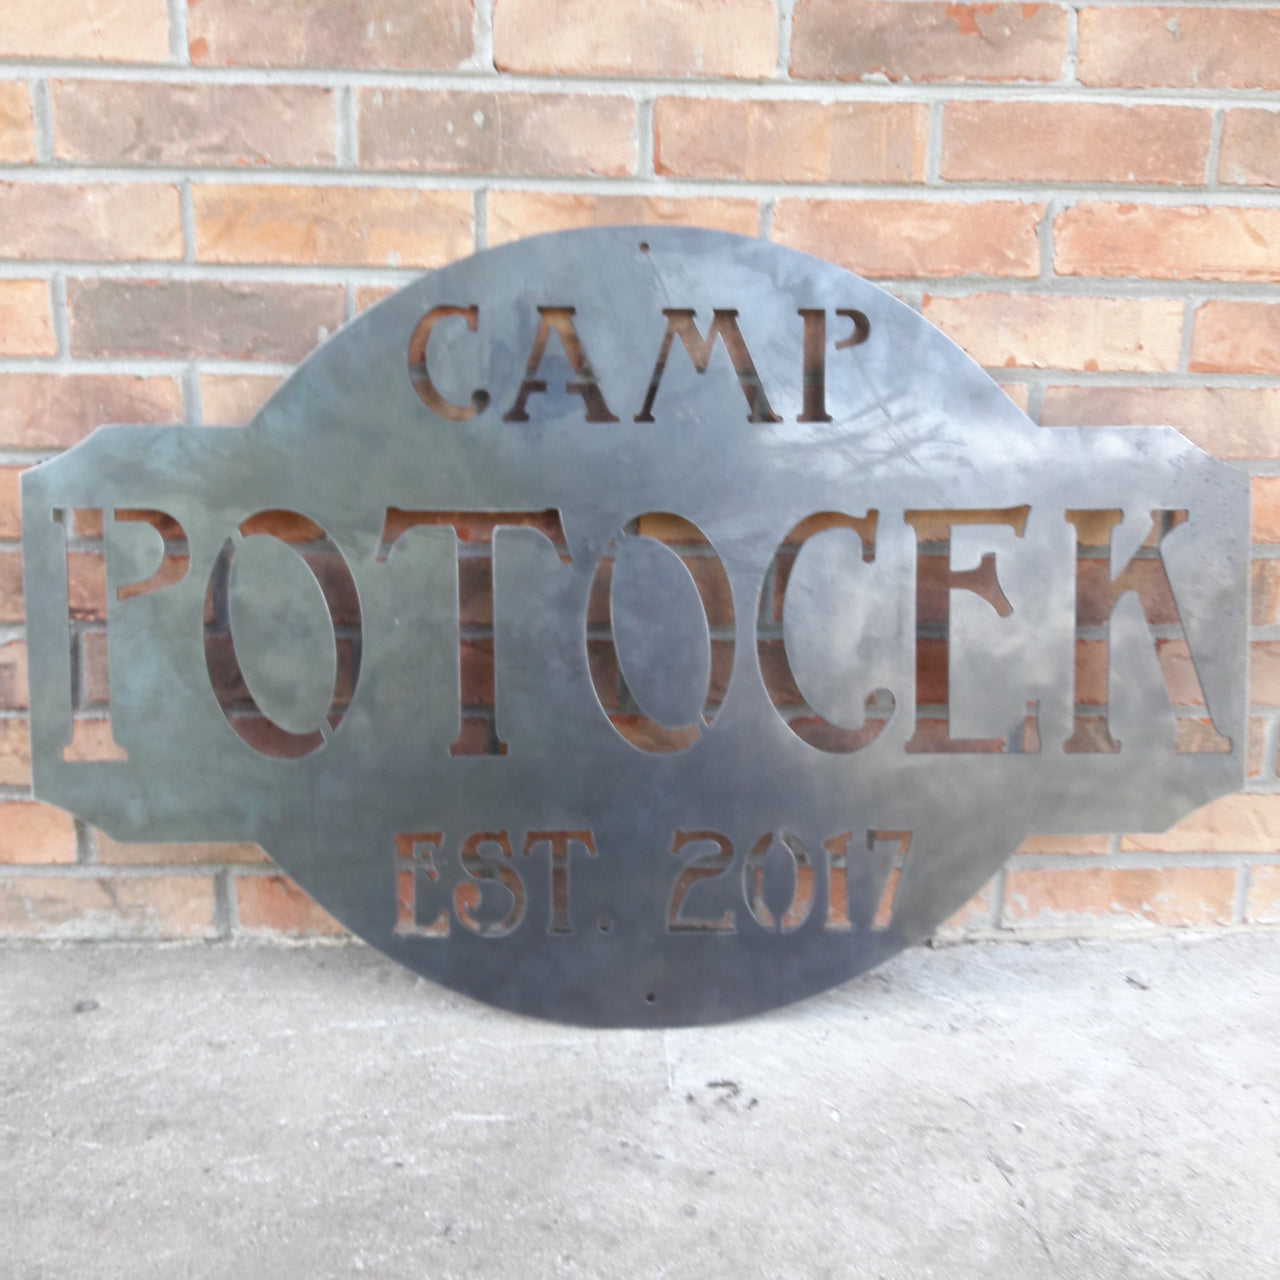 Personalized Metal Camp Sign - Camper Decor - Camping Last Name Wall Art - Established Date